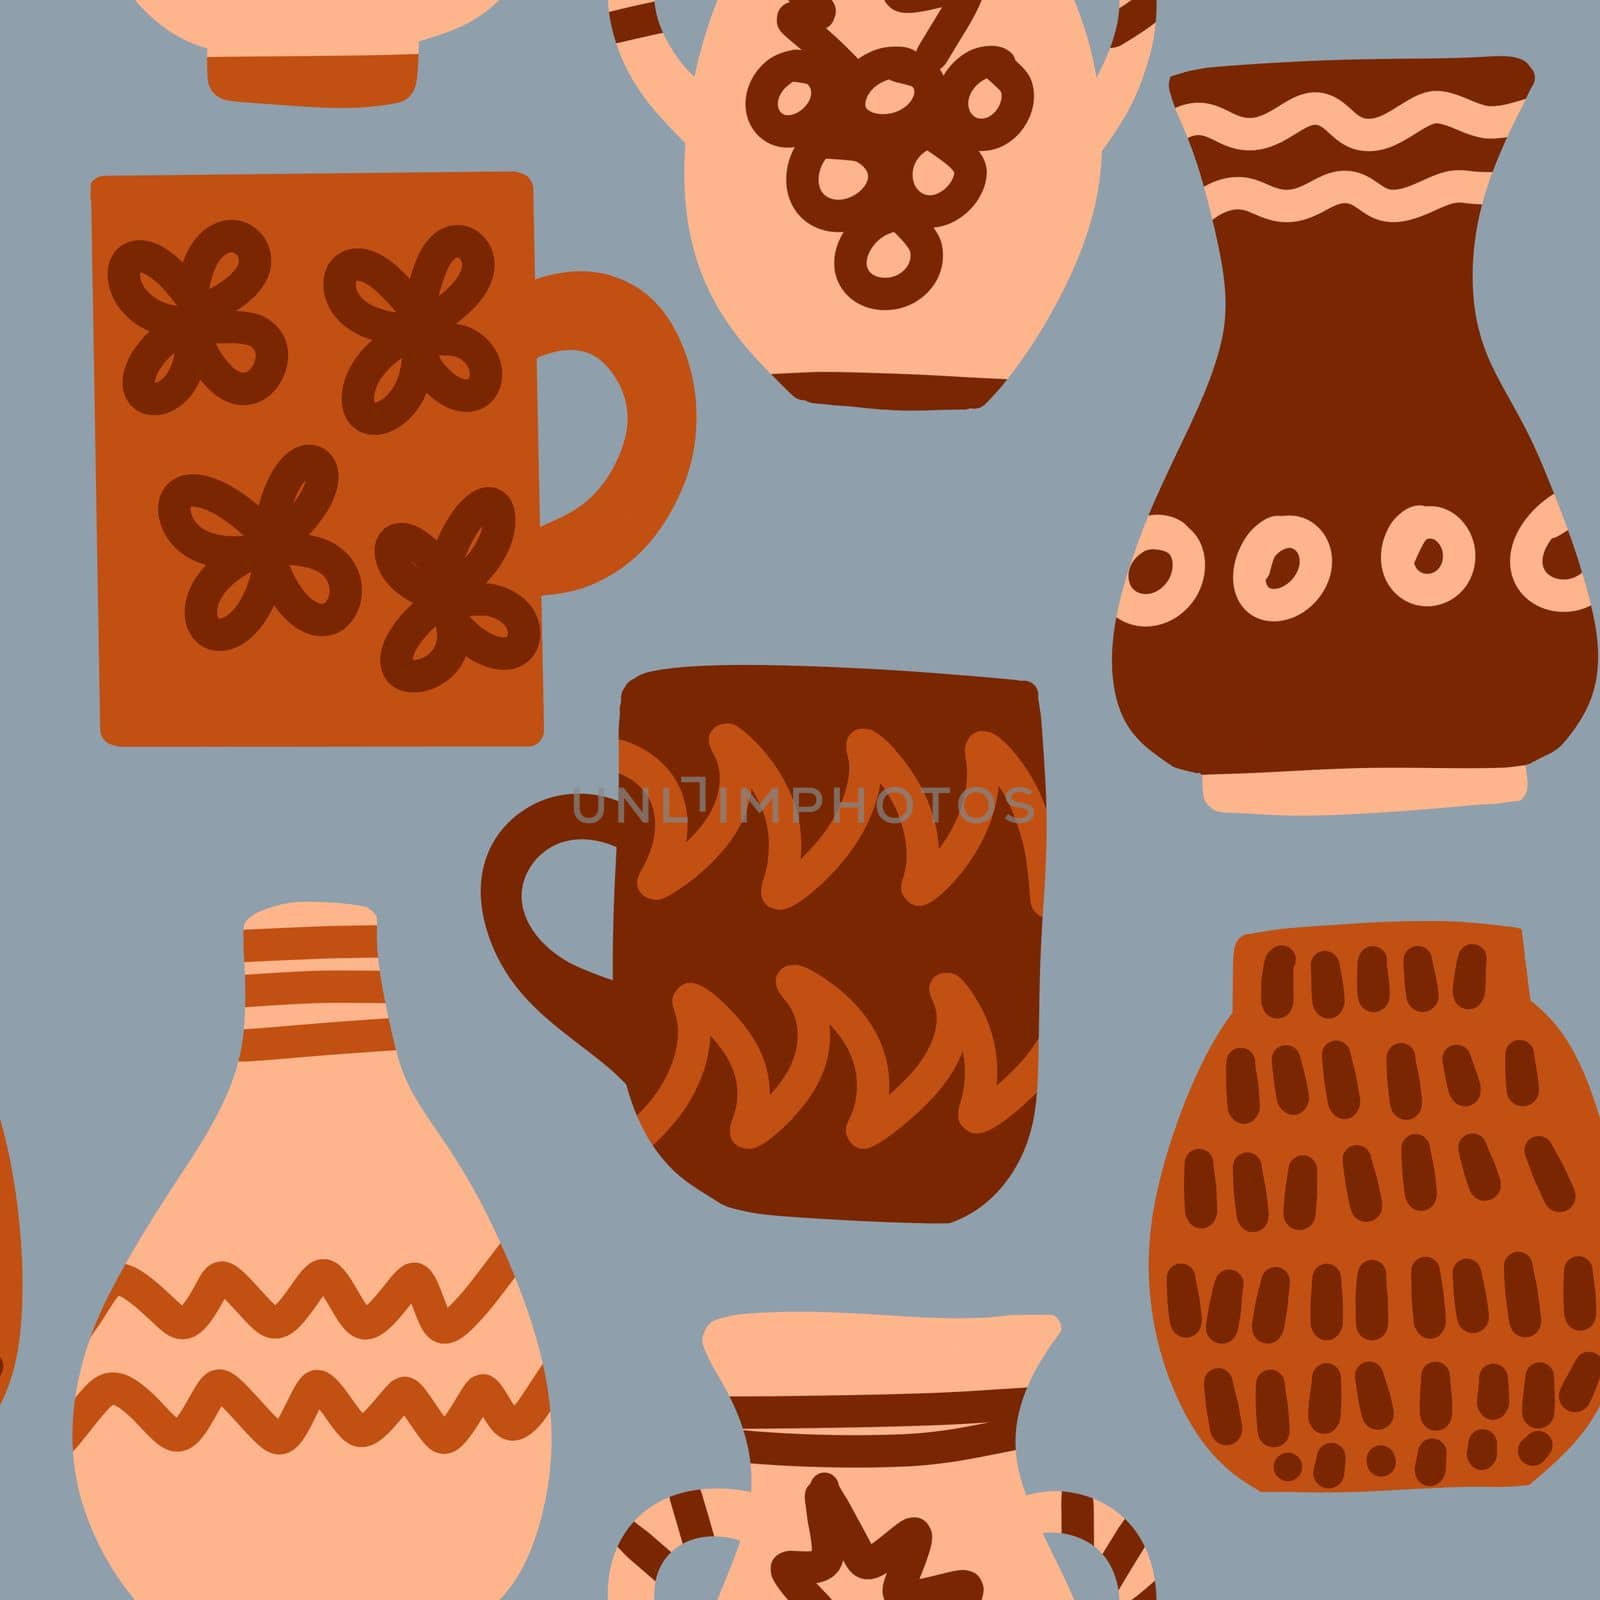 Hand drawn seamless pattern of pottery mugs vases in beige brown on grey background. Ceramic bowl tableware kitchenware kitchen design, cooking dishware in anicent greek style, ceramics utensils design. by Lagmar